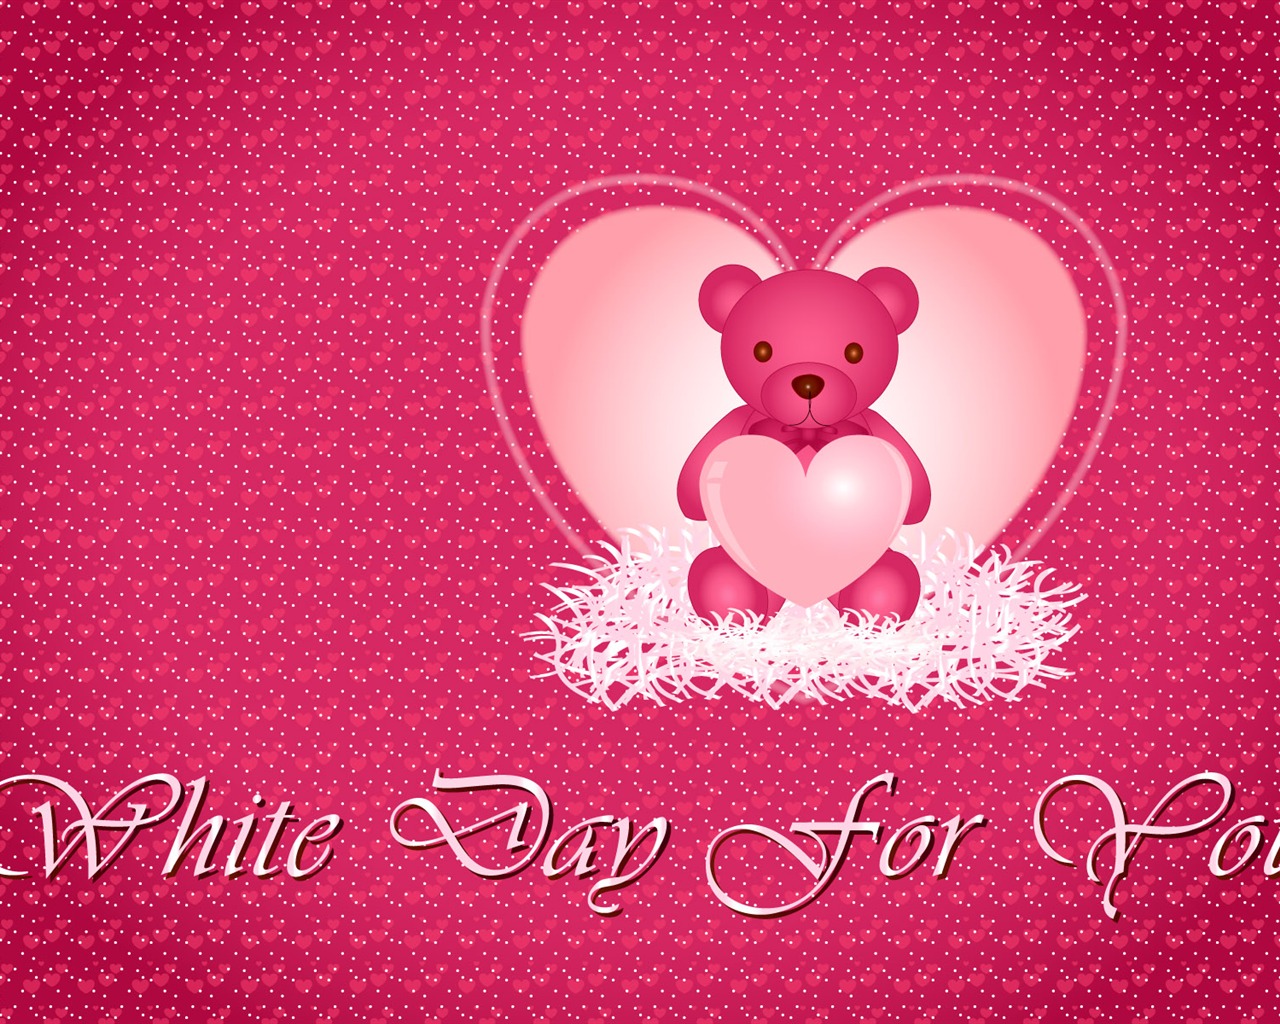 Valentine's Day Theme Wallpapers (2) #2 - 1280x1024